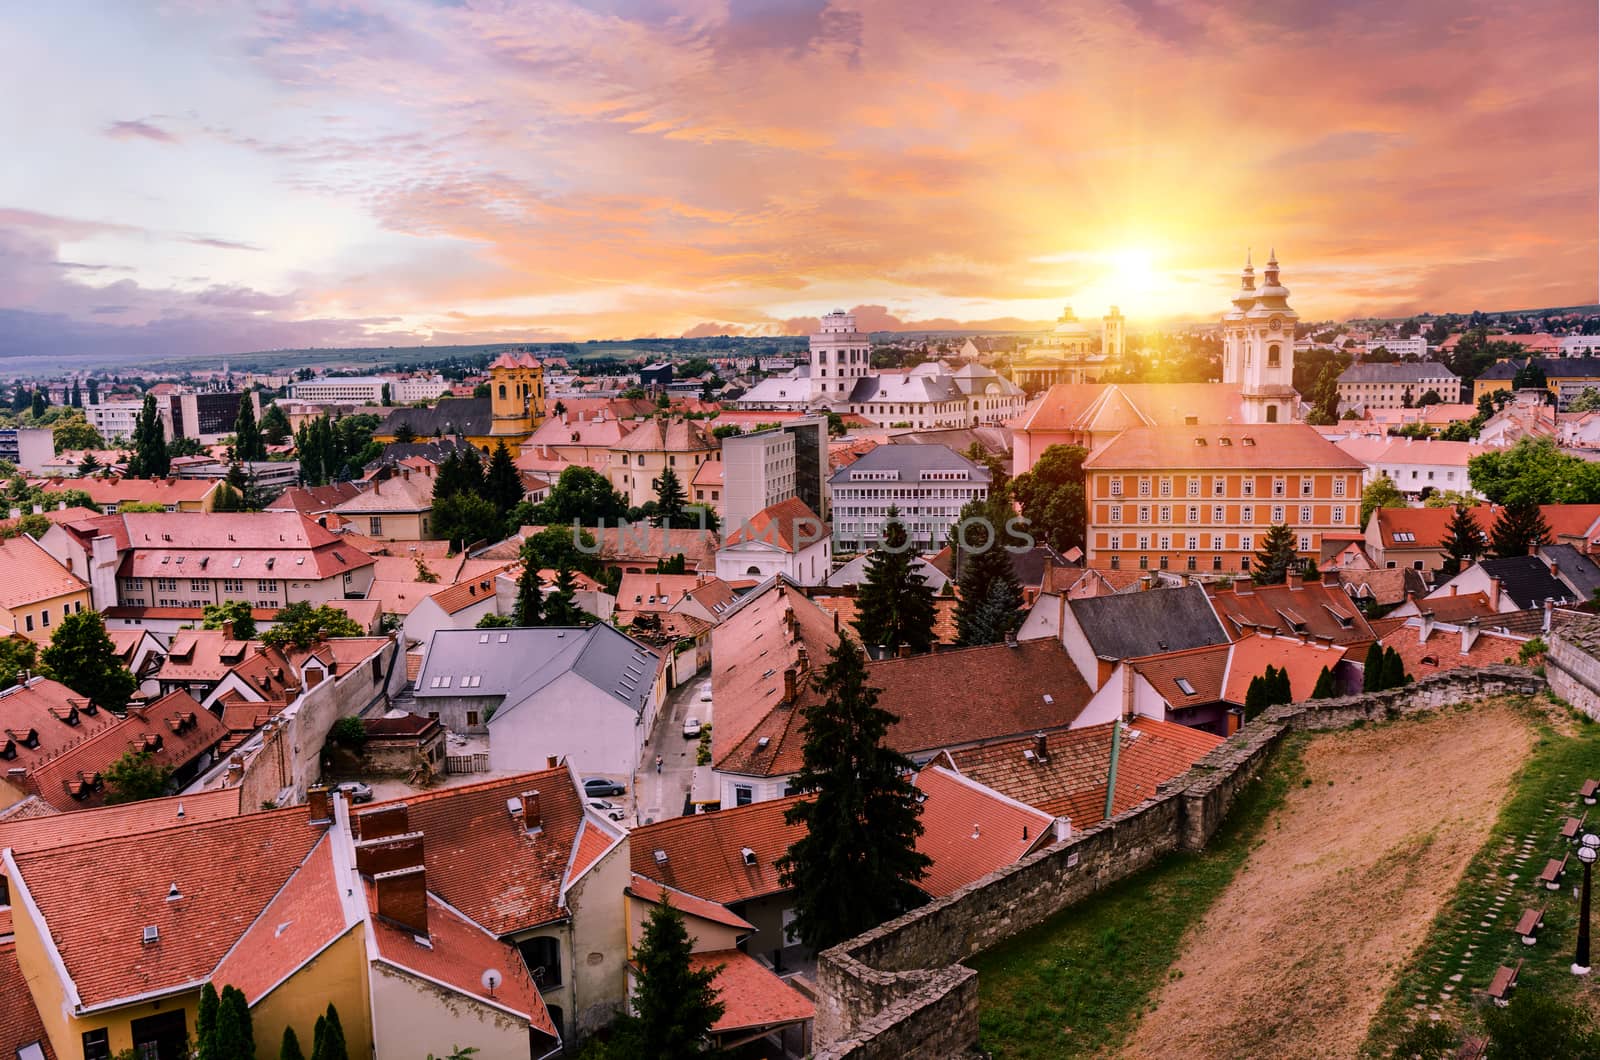 Sunset over Eger by fyletto